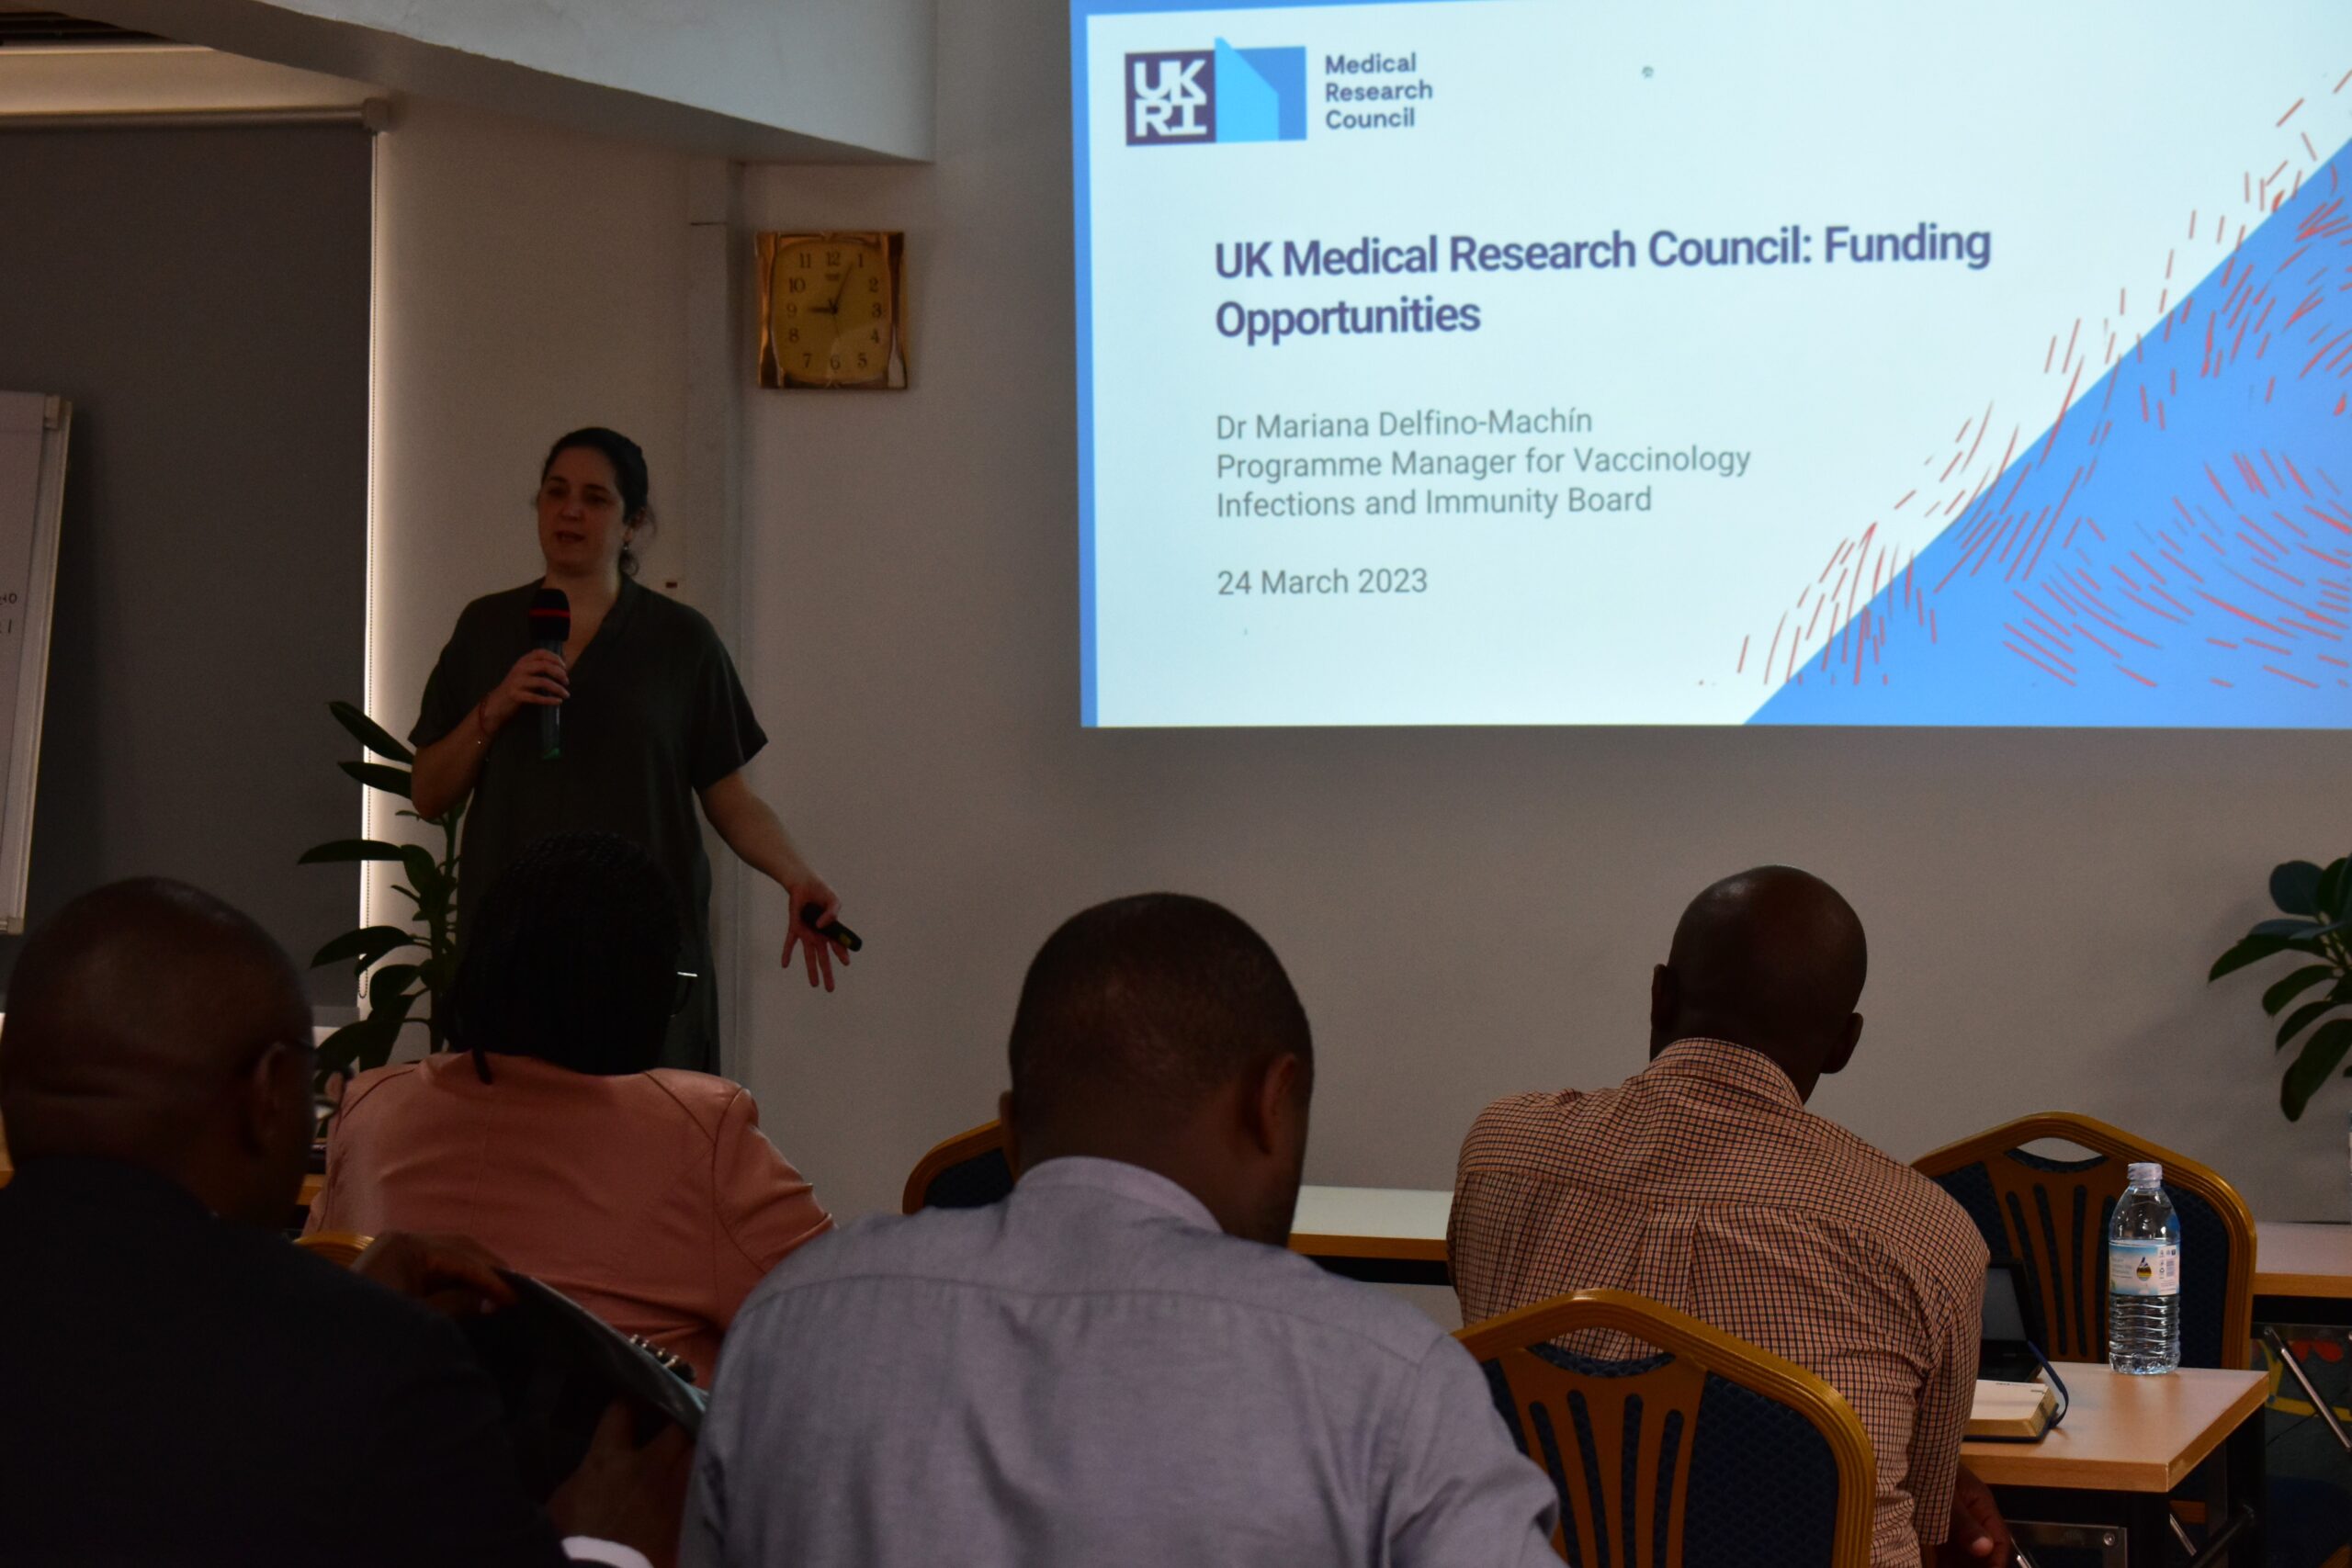 Dr Mariana Delfino-Machίn, the Programme Manager for Vaccinology- Infections & Immunity Board (Medical Research Council, UK Research & Innovation) presents on funding opportunities for health research avaliable through UKR-MRC.